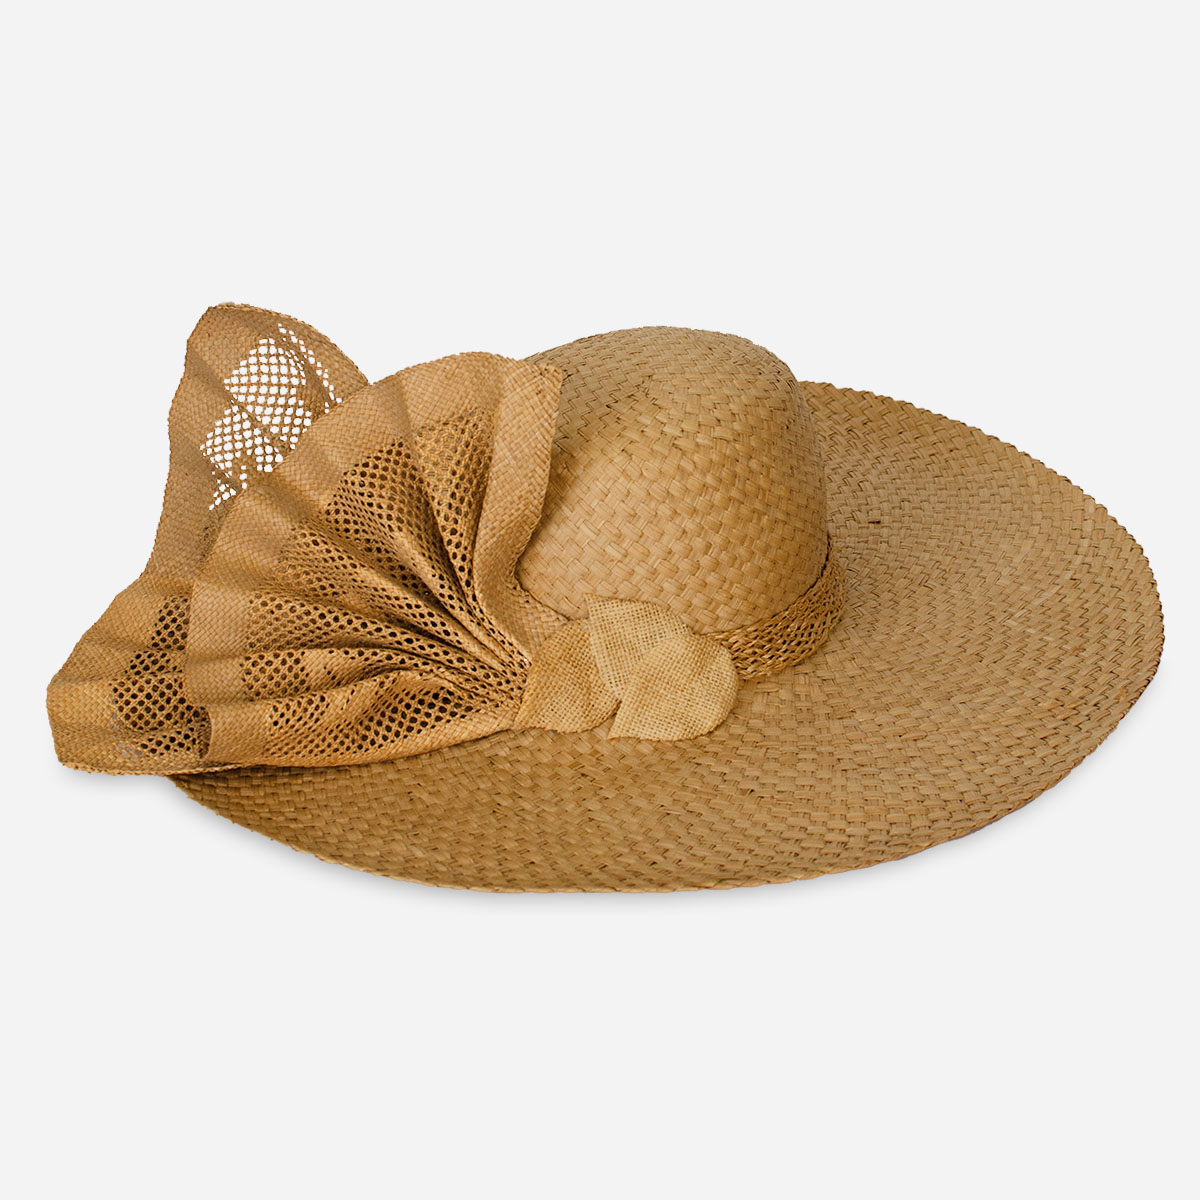 Wide brim straw hat from paris france